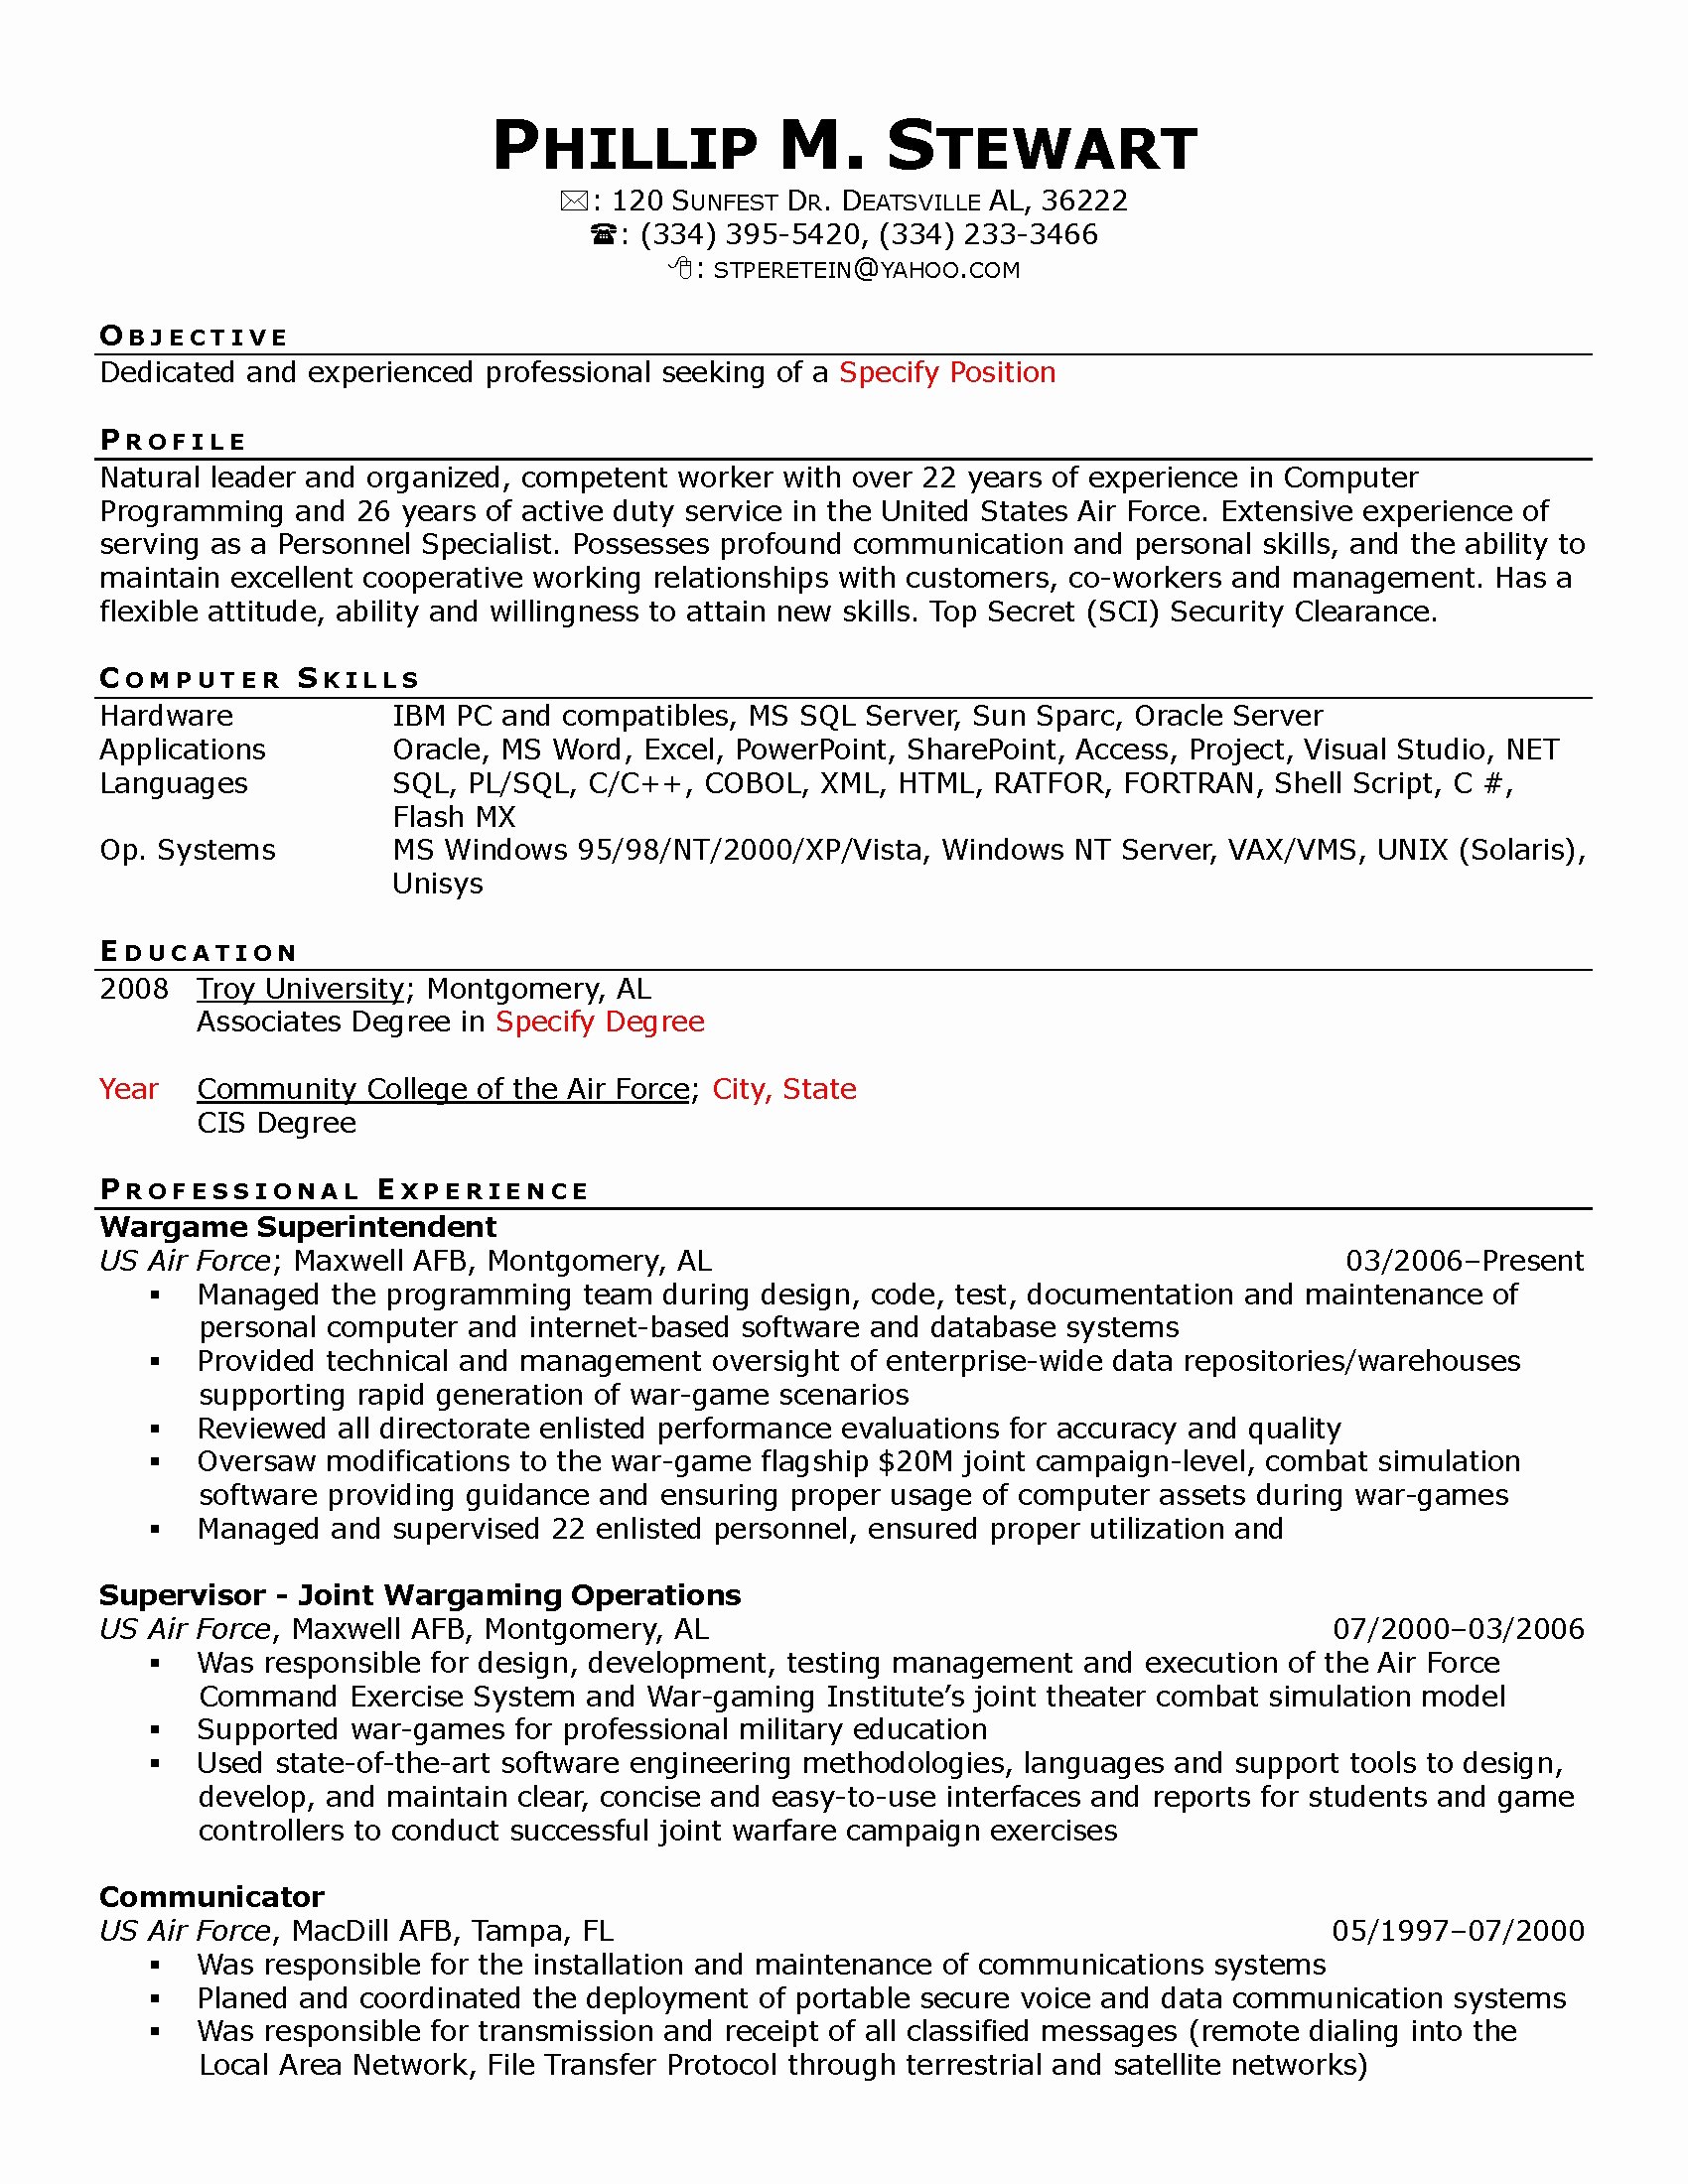 Air force Position Paper Template Fresh Personnel Security Specialist Resume Sample Resume Ideas